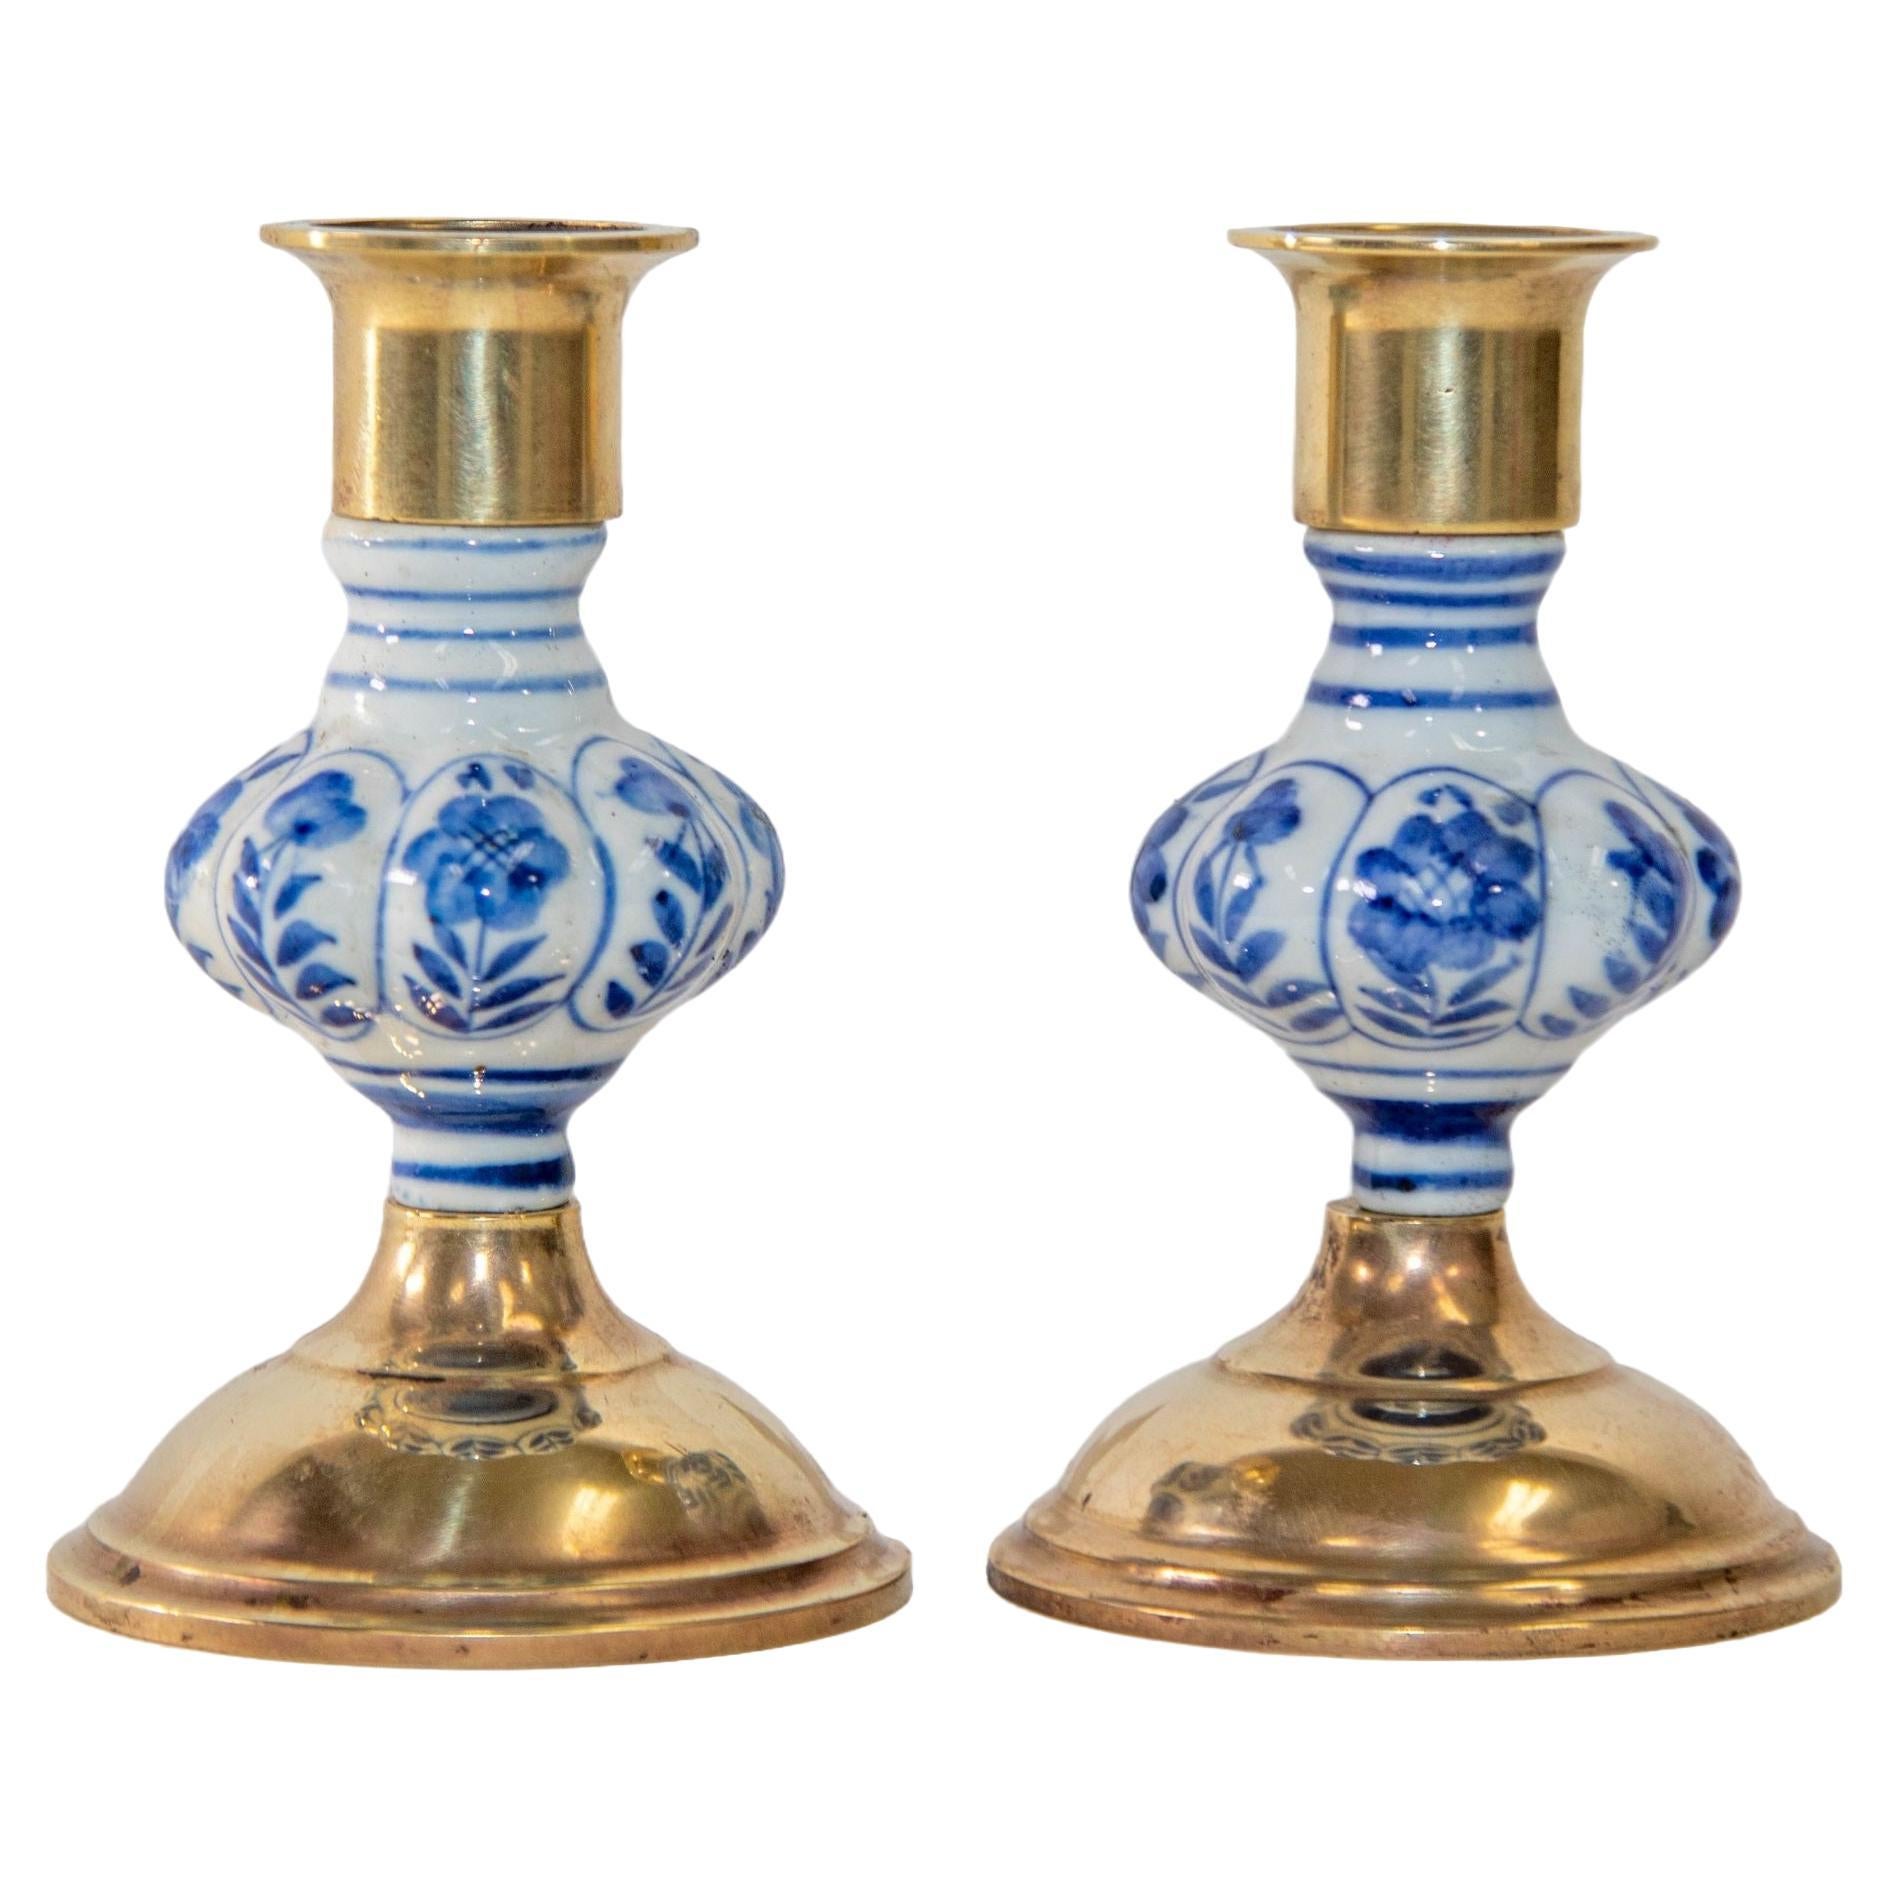 Vintage Delft Floral Blue and White Ceramic and Brass Candlesticks, a Pair 1950s For Sale